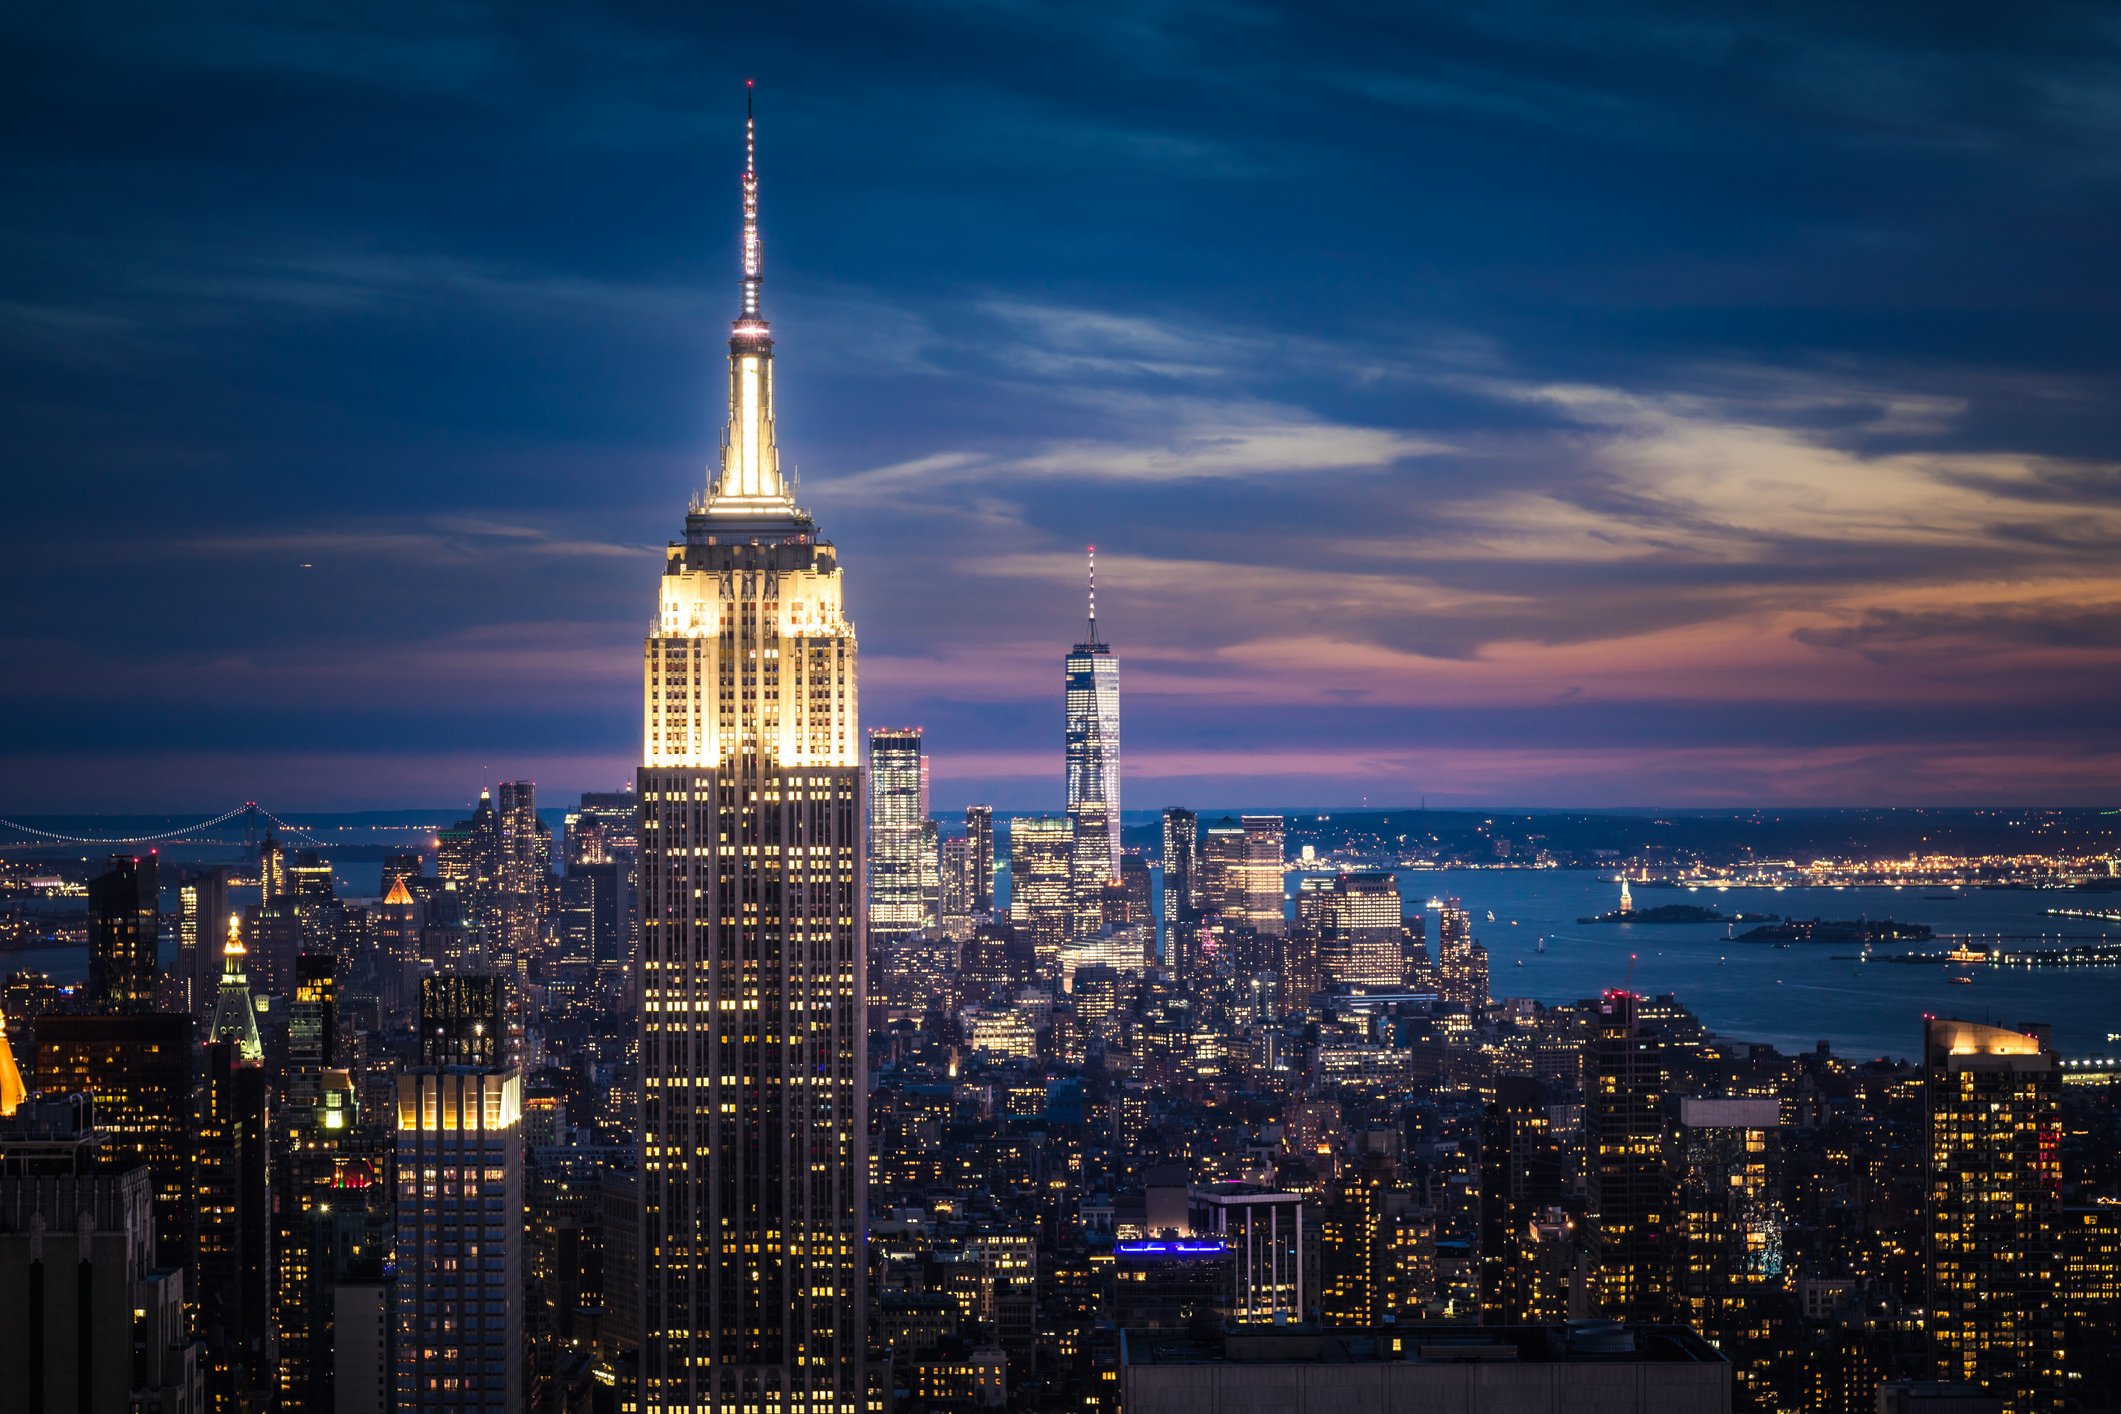 A photo of Empire State Building and New York City skyline at night. | Photo: Getty Images